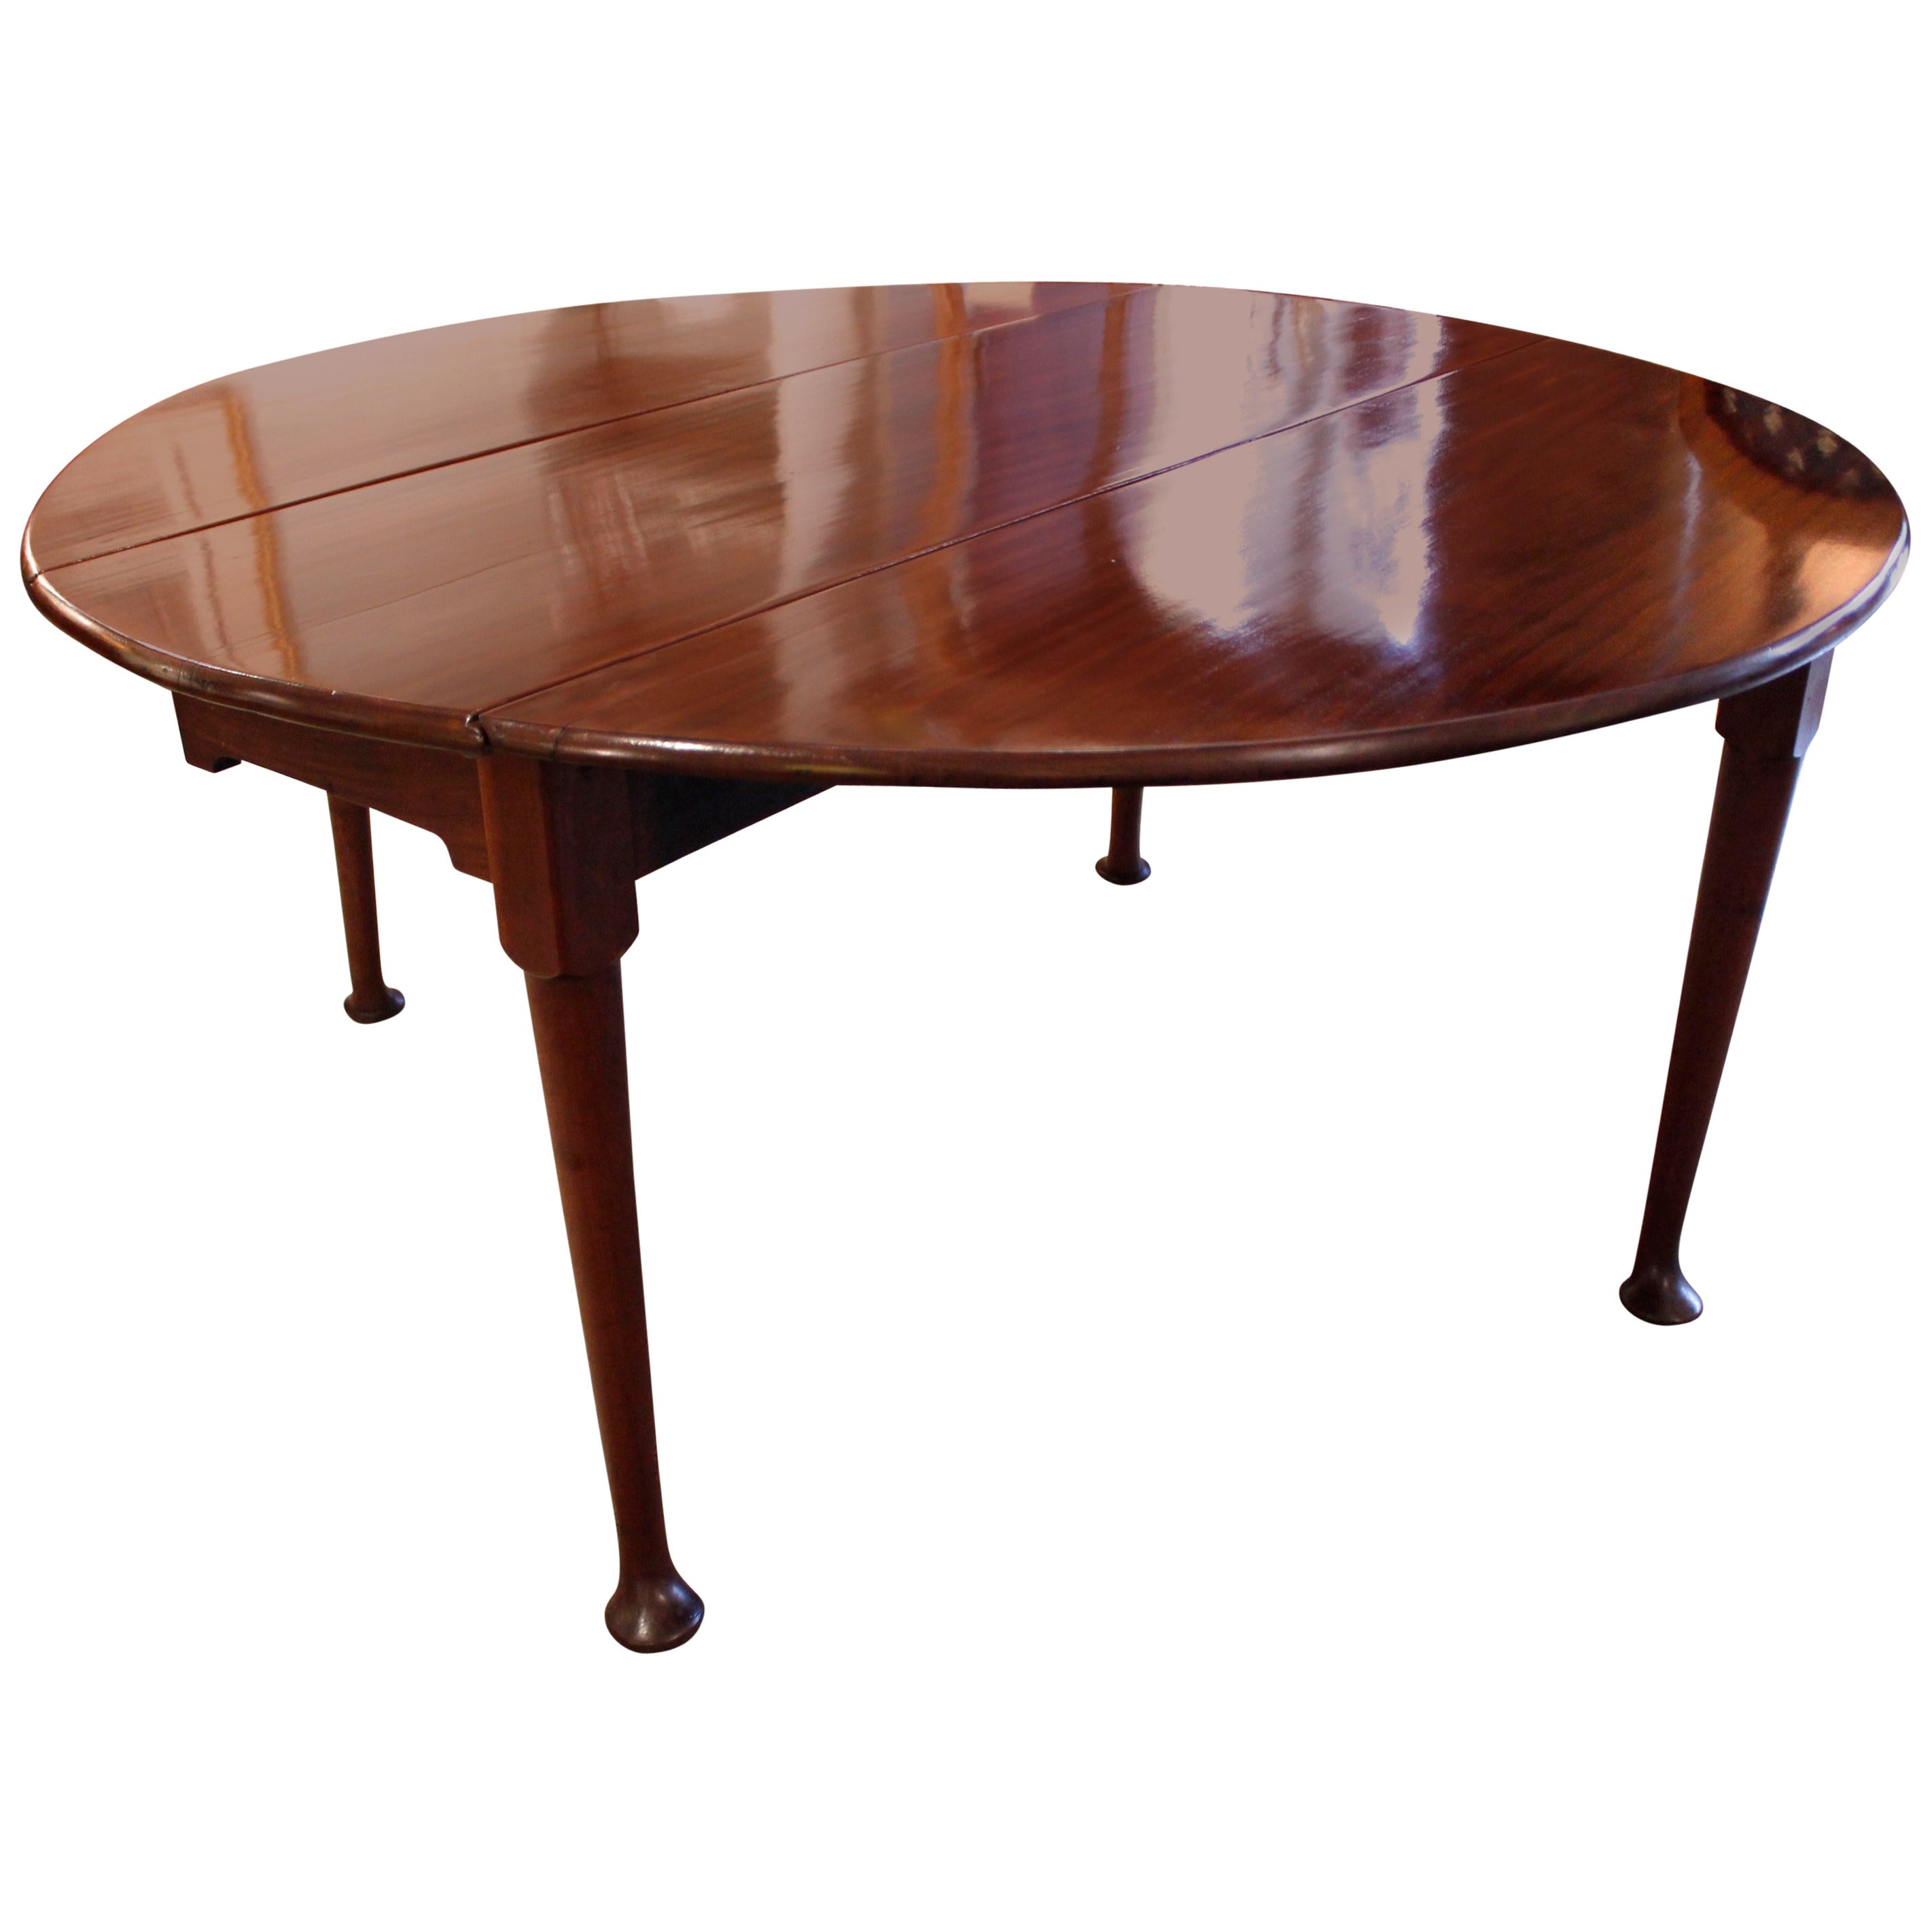 George II Mahogany Round Dining Table, 18th Century For Sale